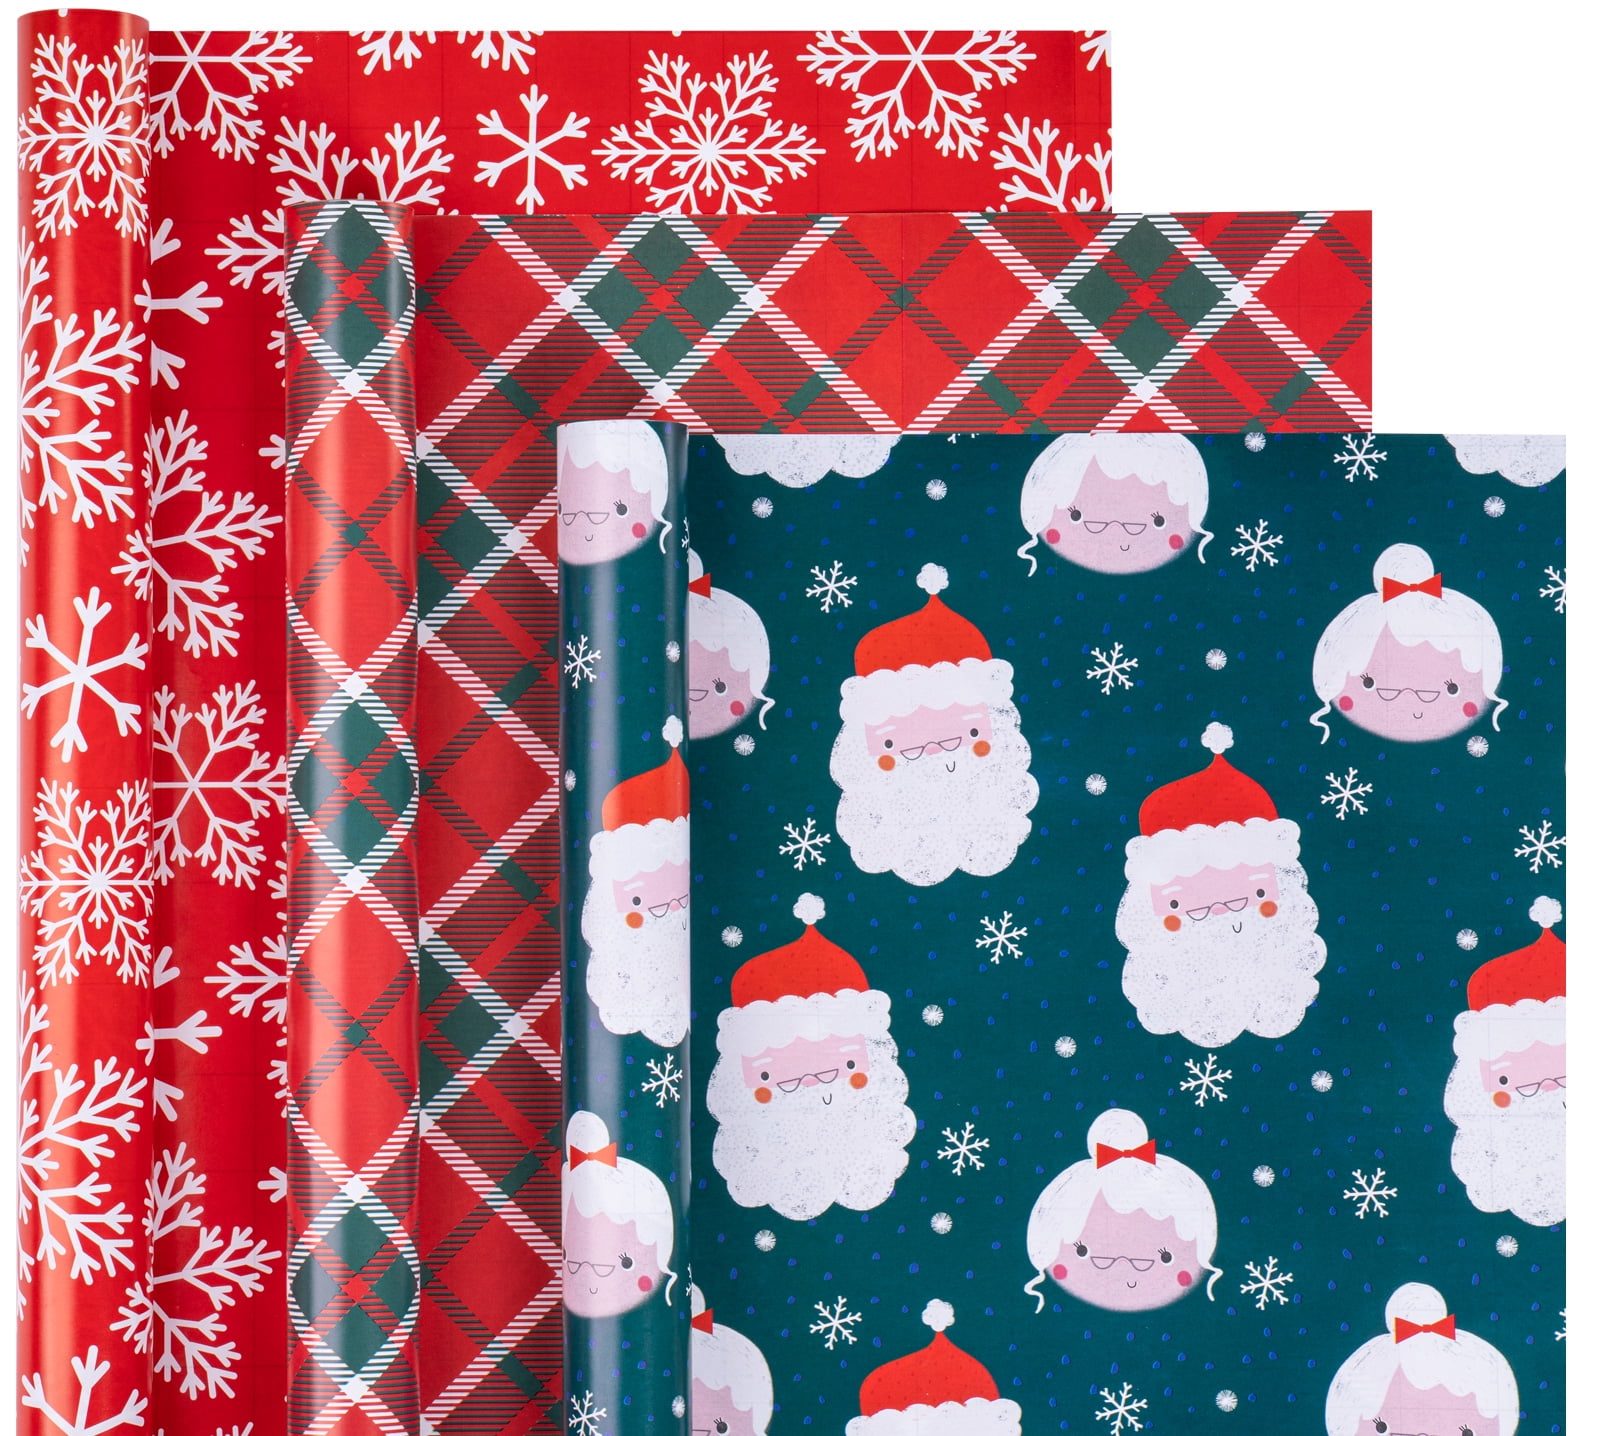 WRAPAHOLIC Christmas Wrapping Paper Roll - Red, Green and Pink Christmas  Gnome Elf Holiday Collection - 4 Rolls - 30 Inch X 120 Inch Per Roll